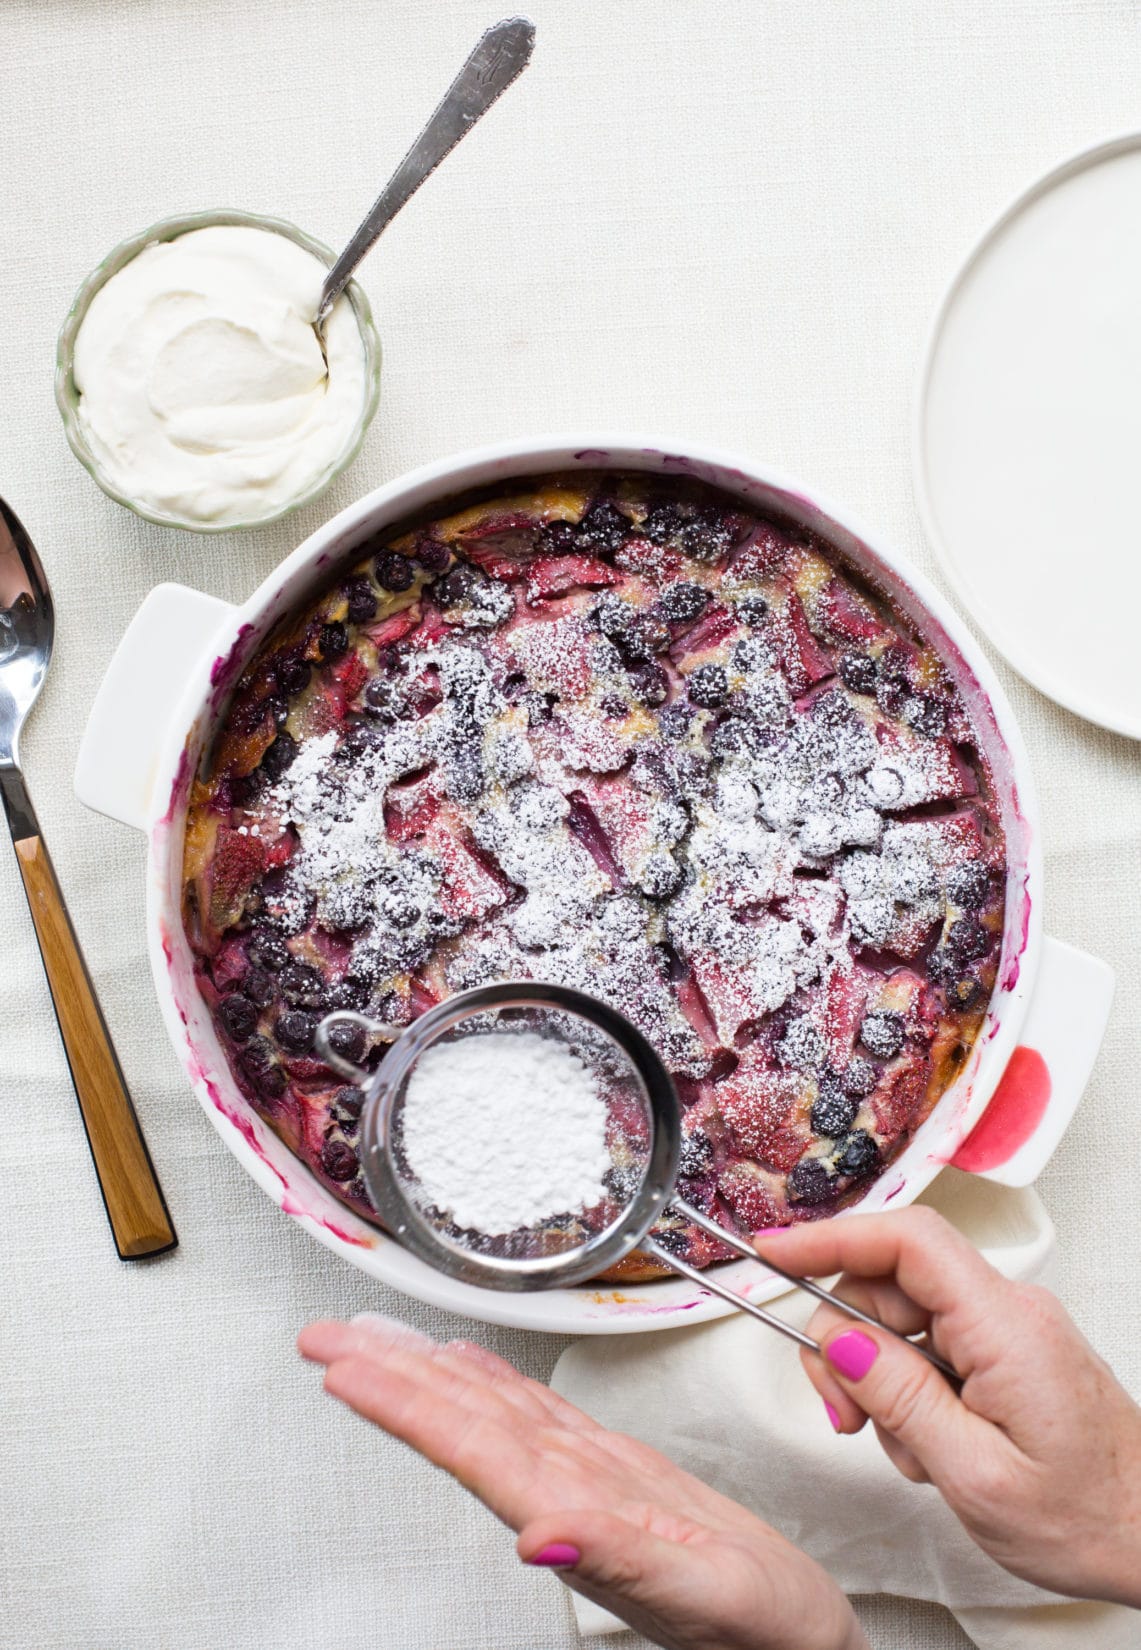 Summer Berry Clafoutis with Whipped Cream / Sarah Crowder / Katie Workman / themom100.com